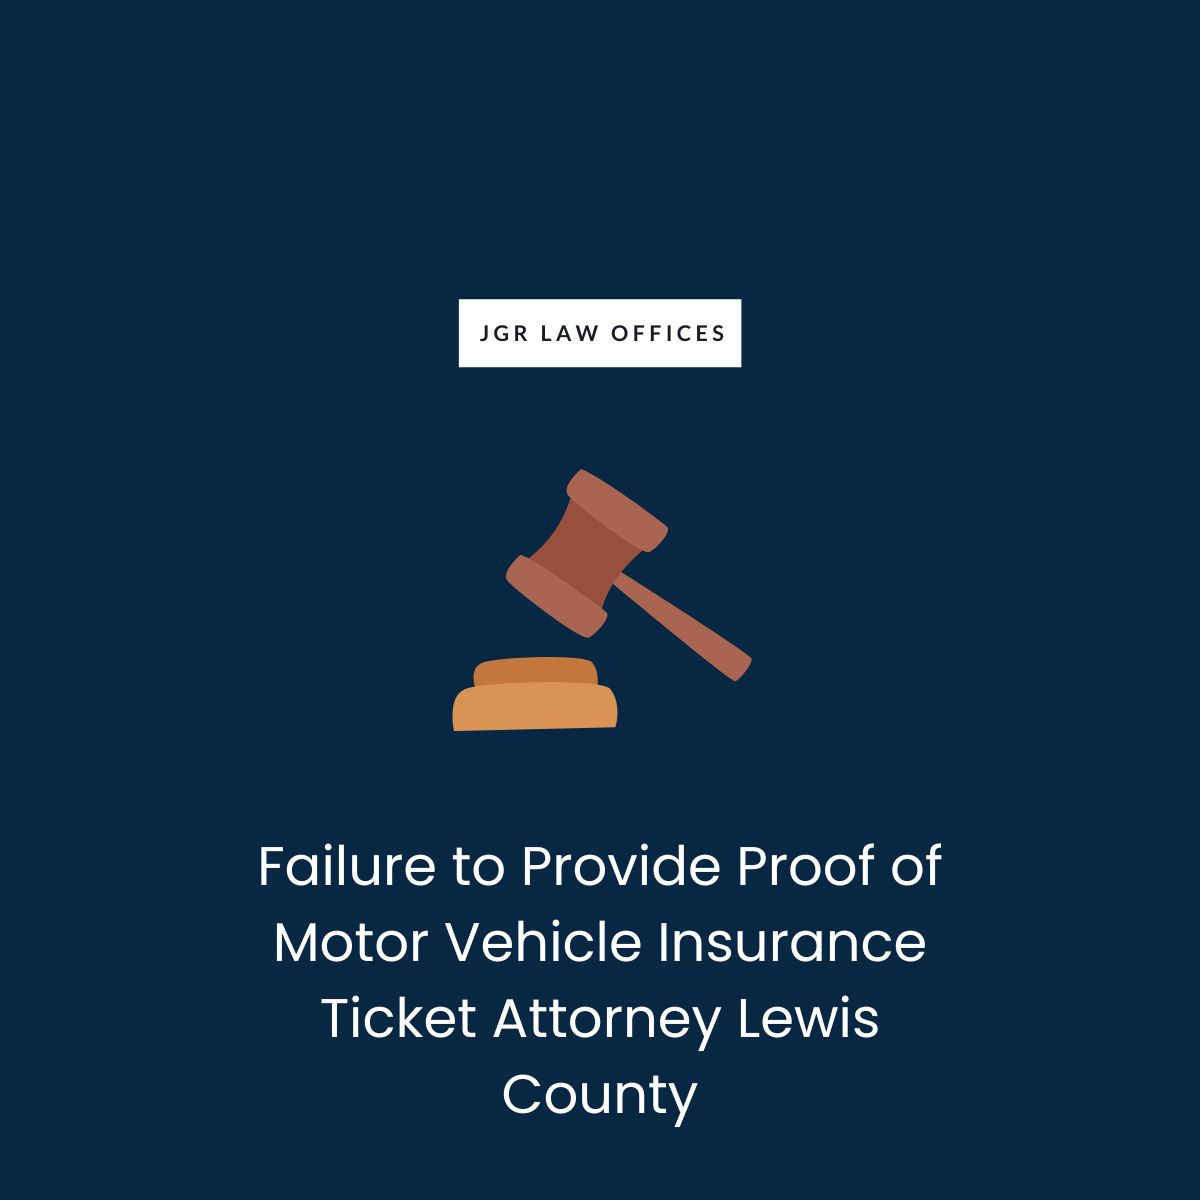 Failure to Provide Proof of Motor Vehicle Insurance Ticket Attorney Lewis County